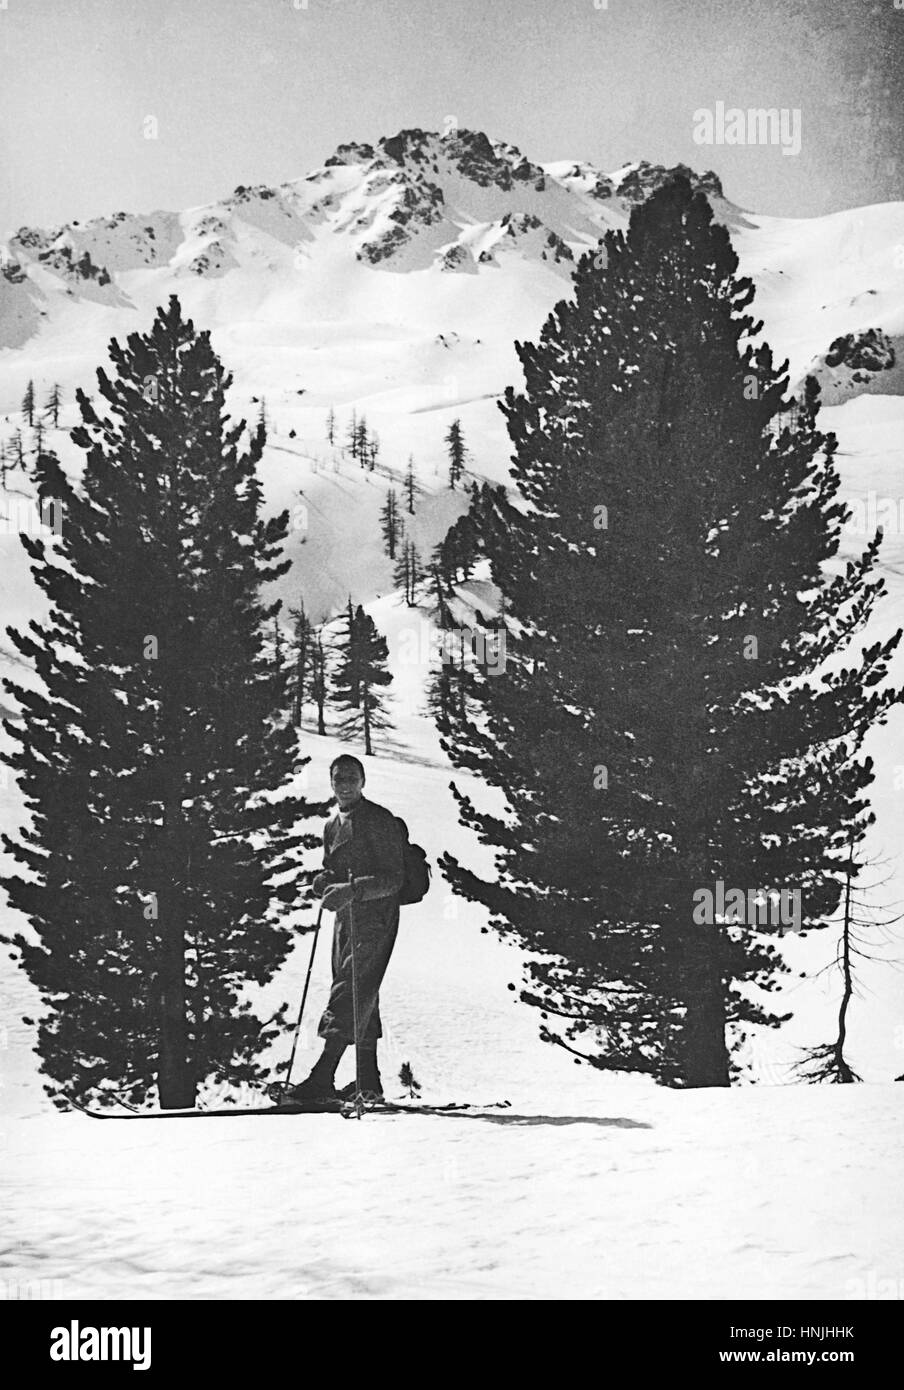 Italy, Dolomites, pass Sorel, 1939 - A skier poses between fir trees on his way to excursion on Alps glacier. Scan from analog photography, private family collection before WWII. Stock Photo